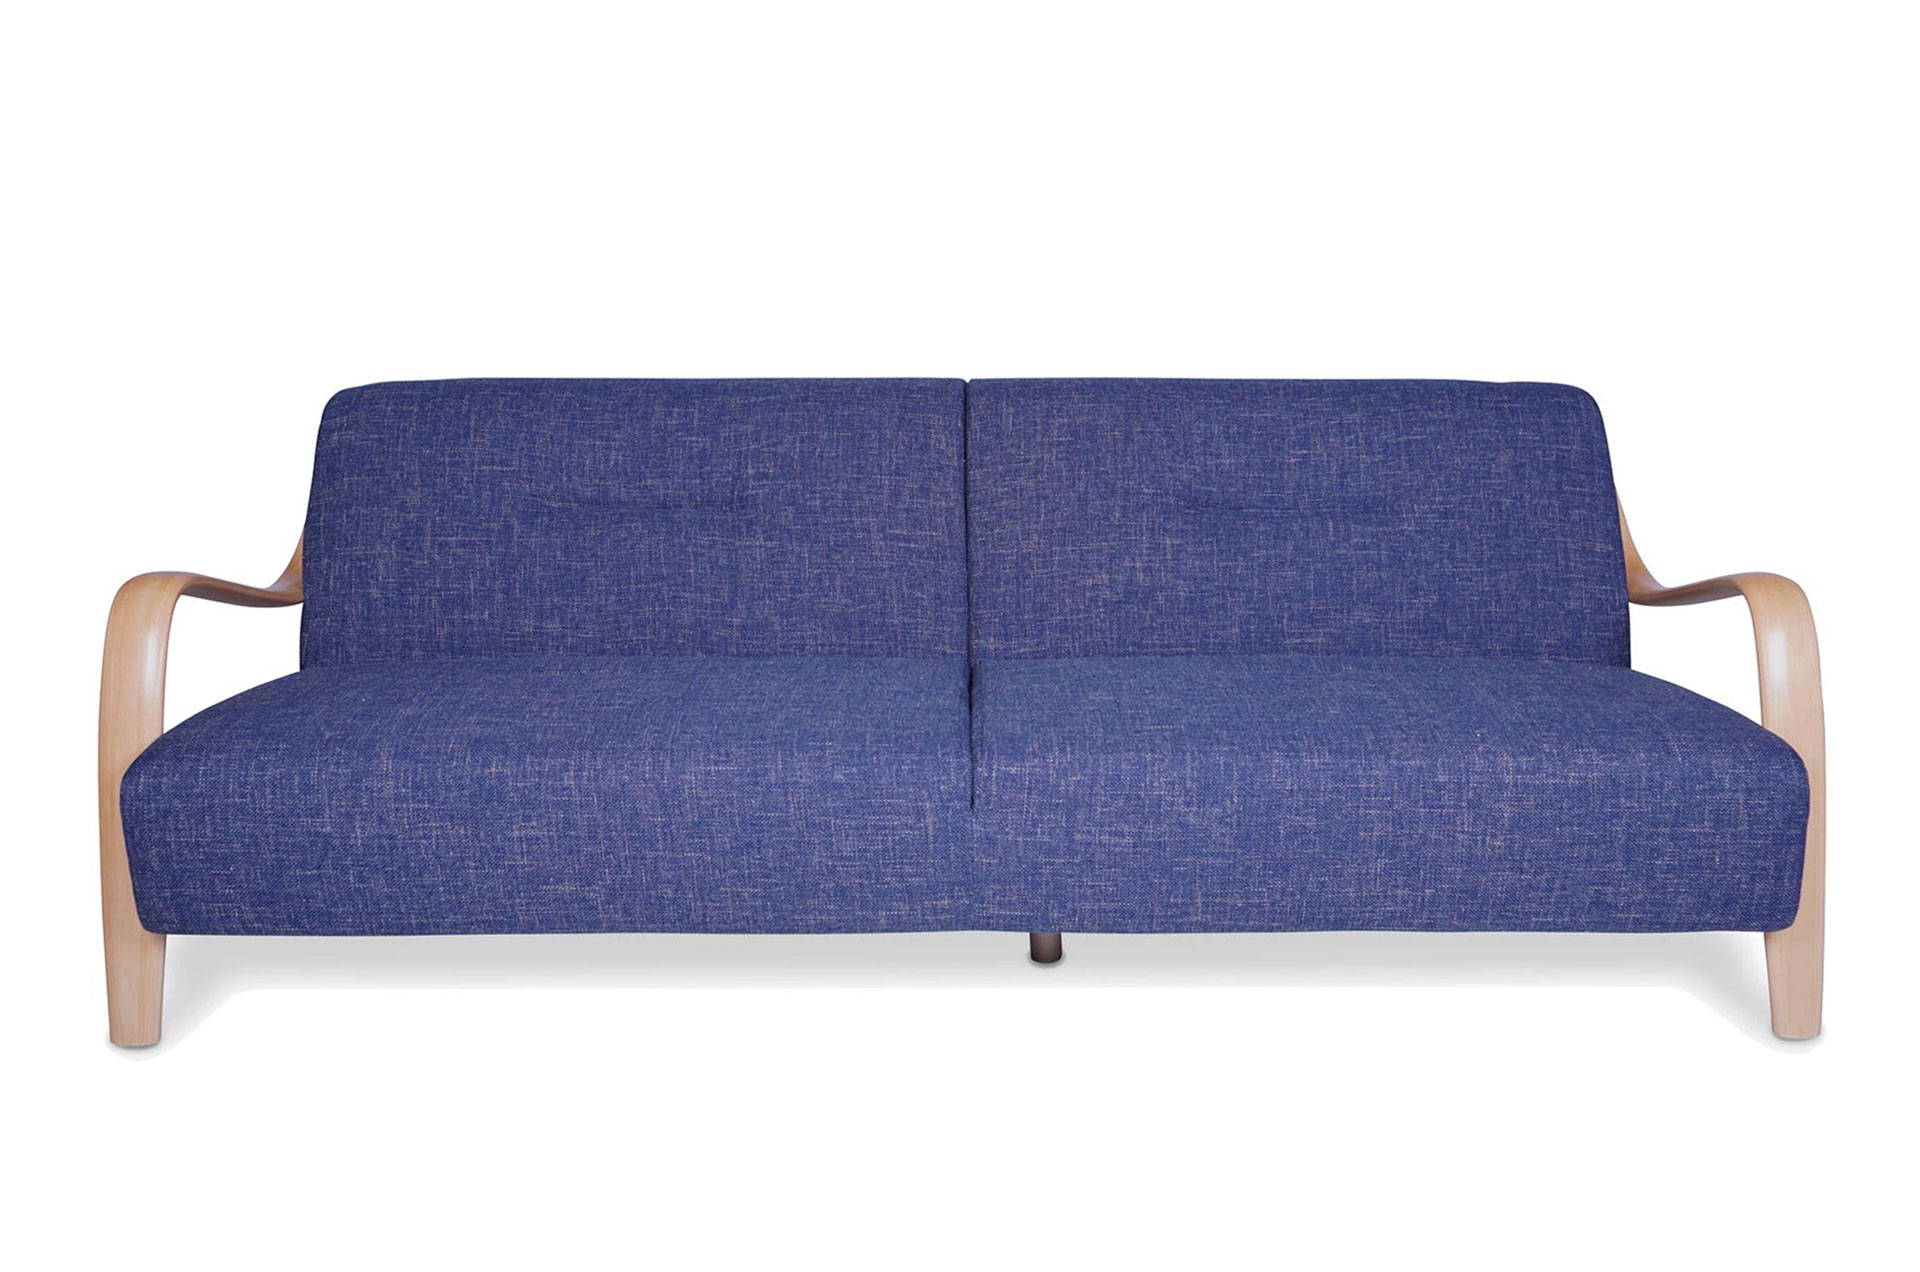 Beech range of fabric sofas made from solid beech timber